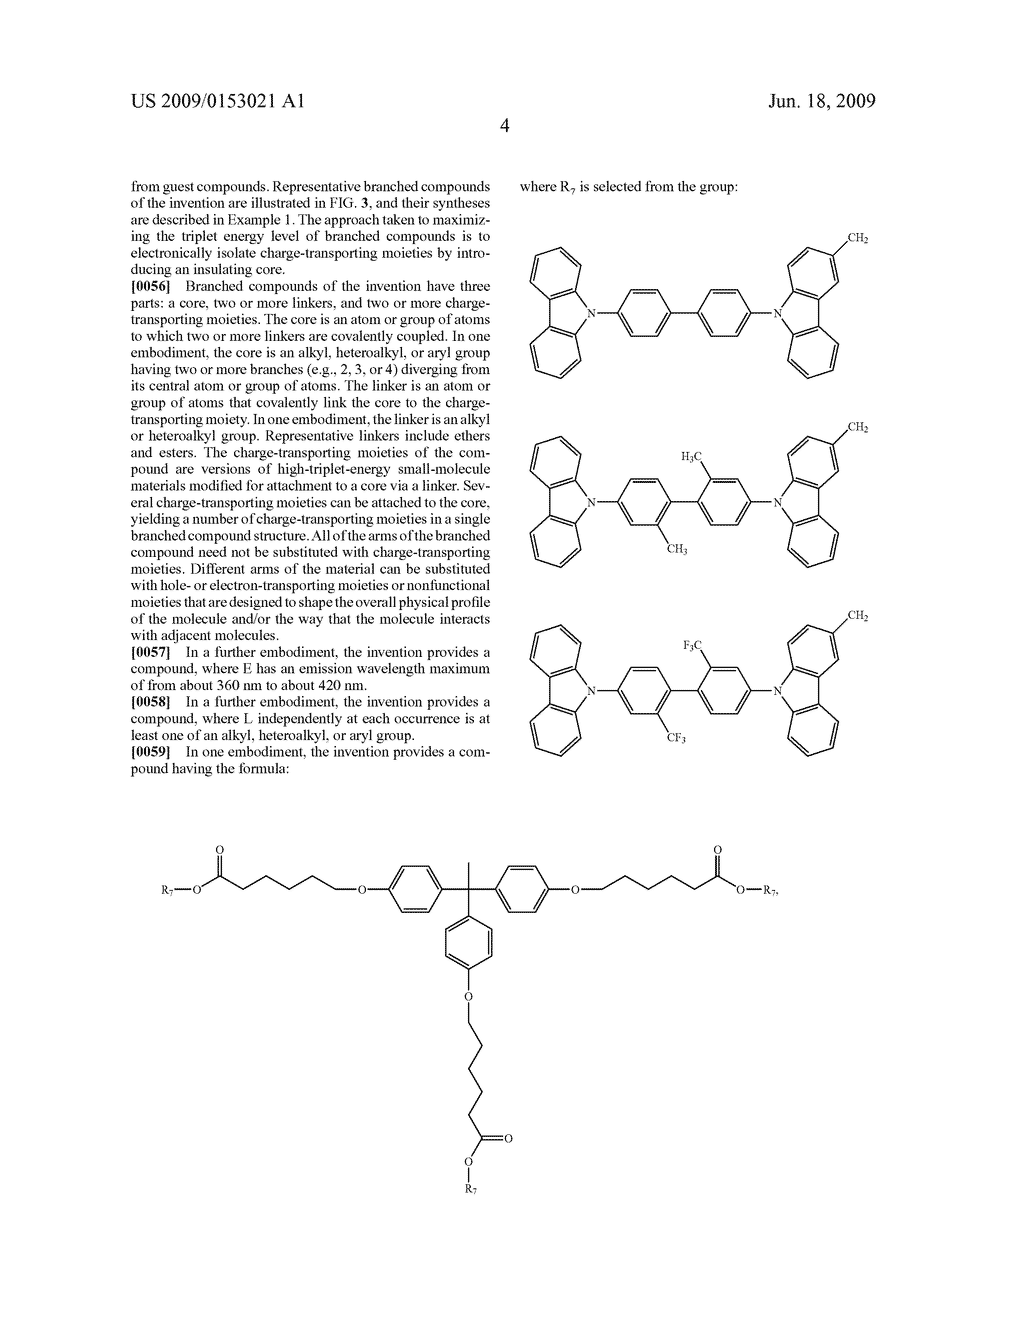 LARGE-BANDGAP HOST MATERIALS FOR PHOSPHORESCENT EMITTERS - diagram, schematic, and image 30